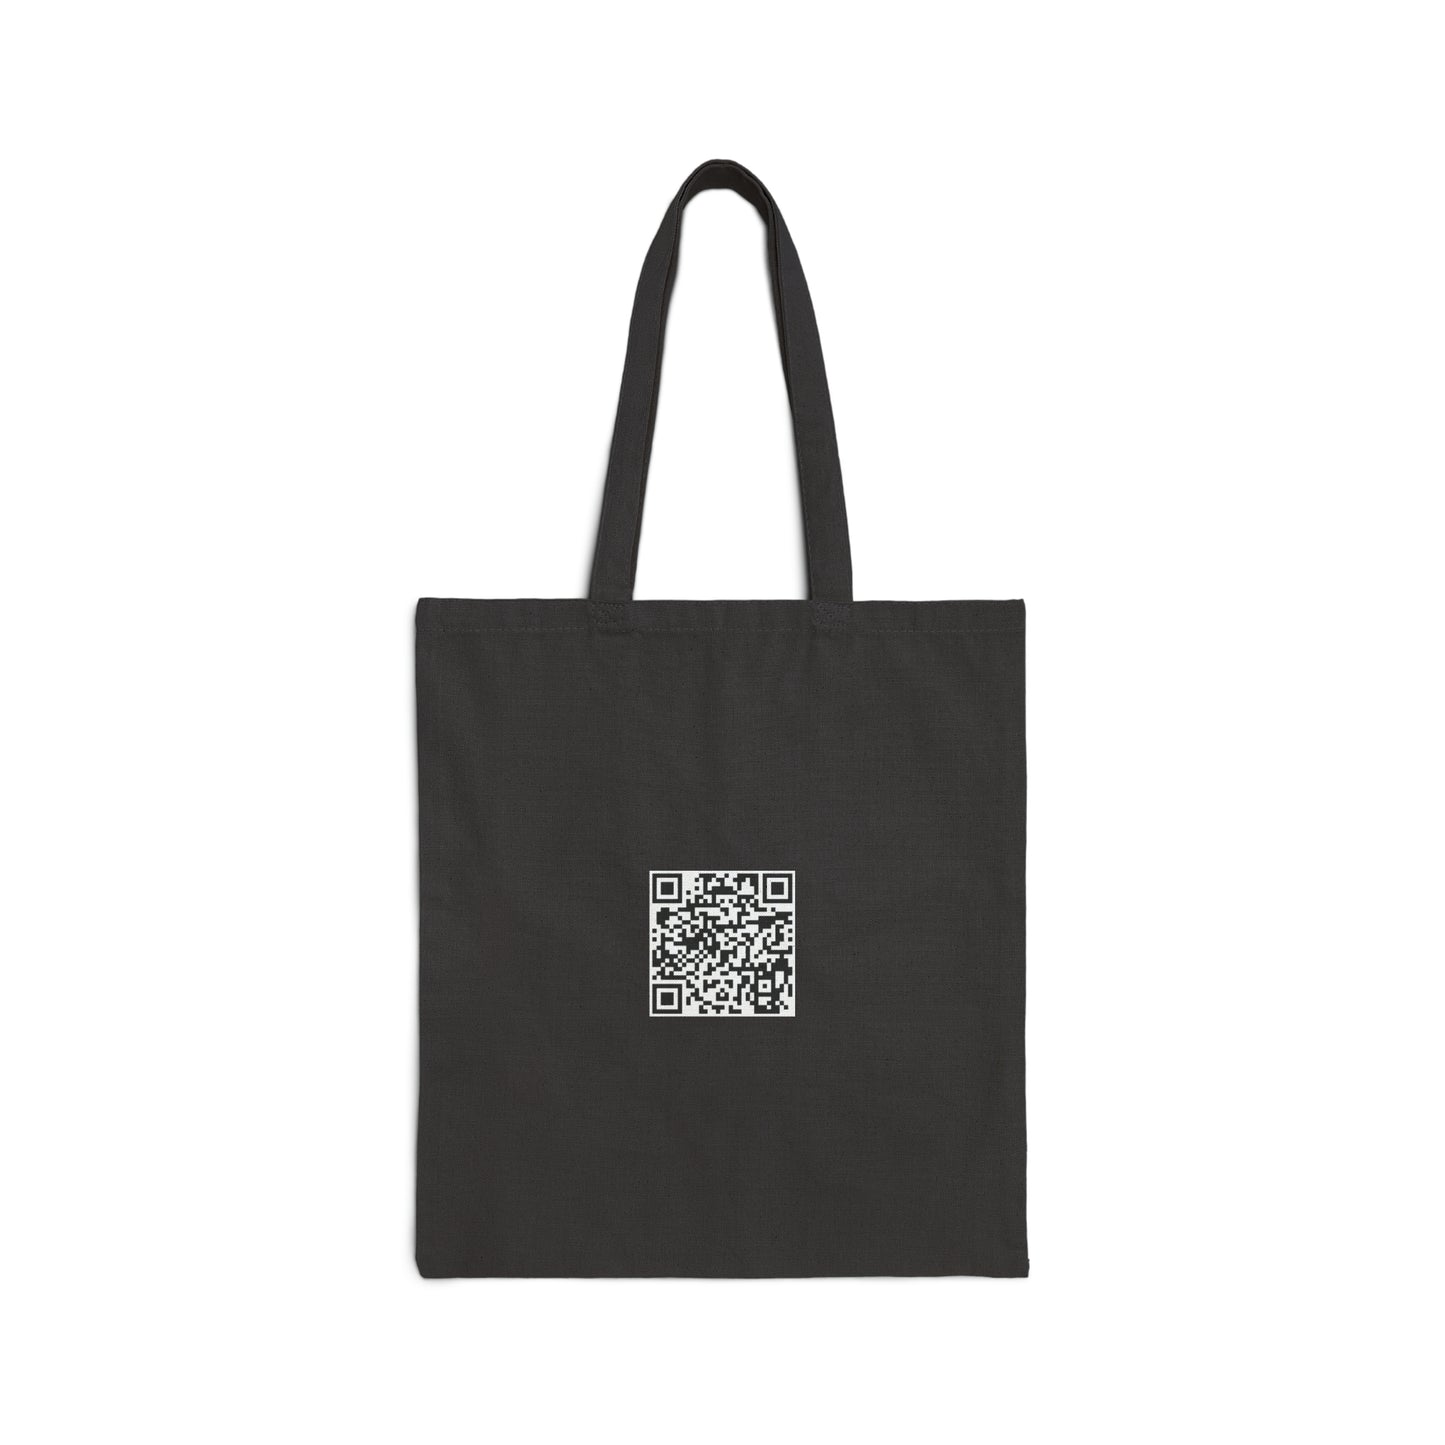 All Because Of You - Cotton Canvas Tote Bag